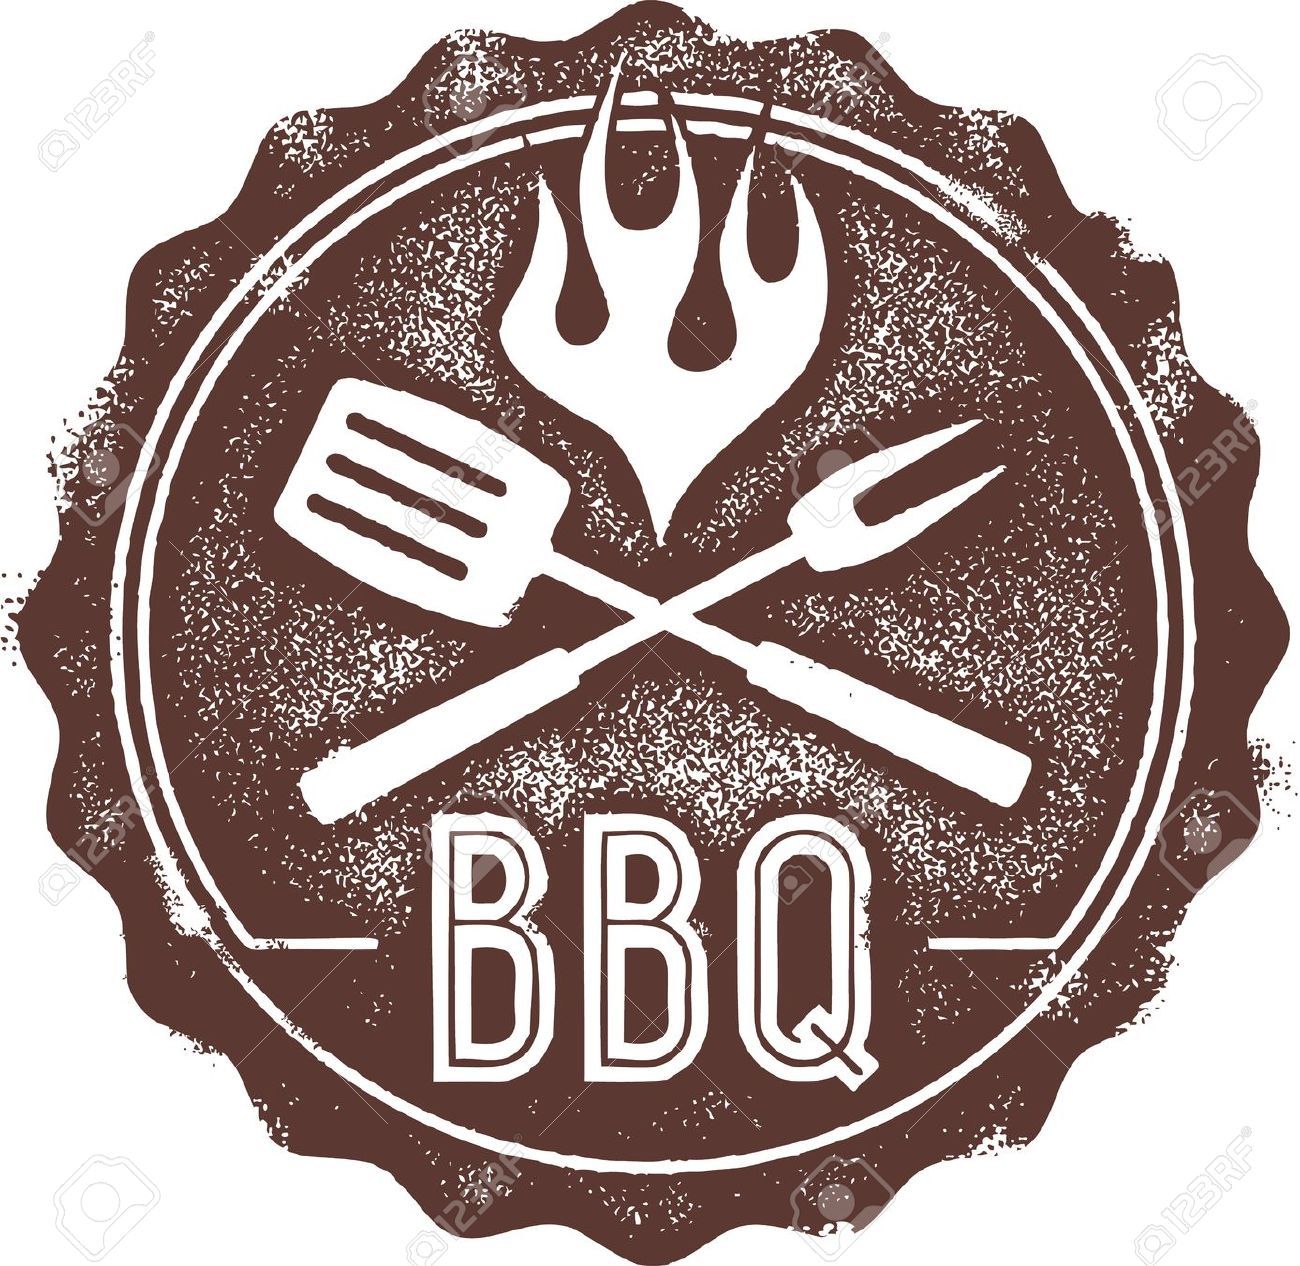 Best barbecue stock illustrations. Bbq clipart logo